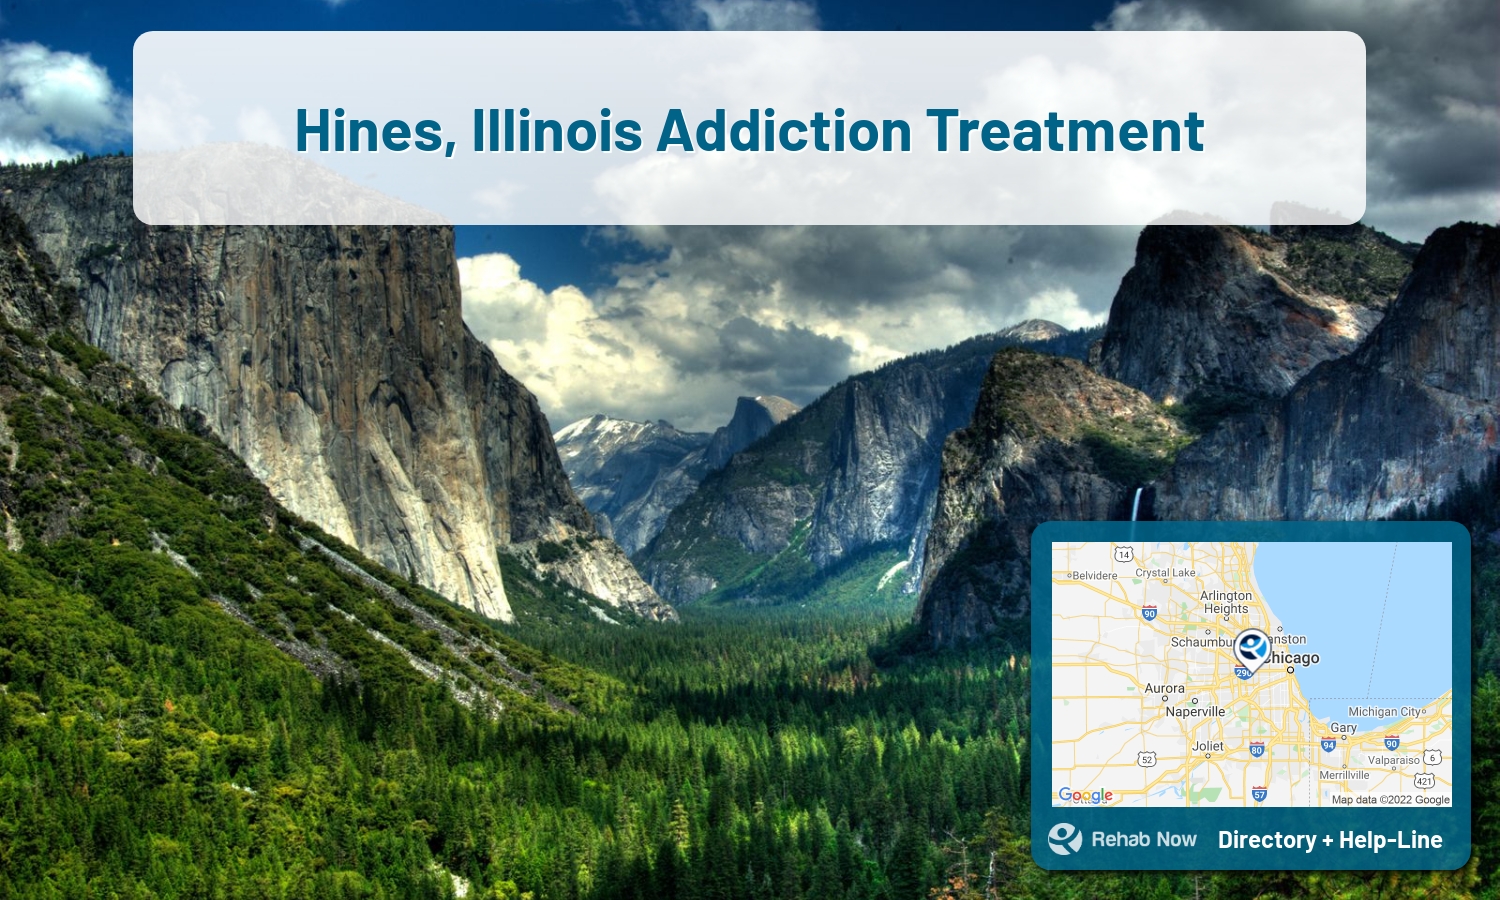 View options, availability, treatment methods, and more, for drug rehab and alcohol treatment in Hines, Illinois